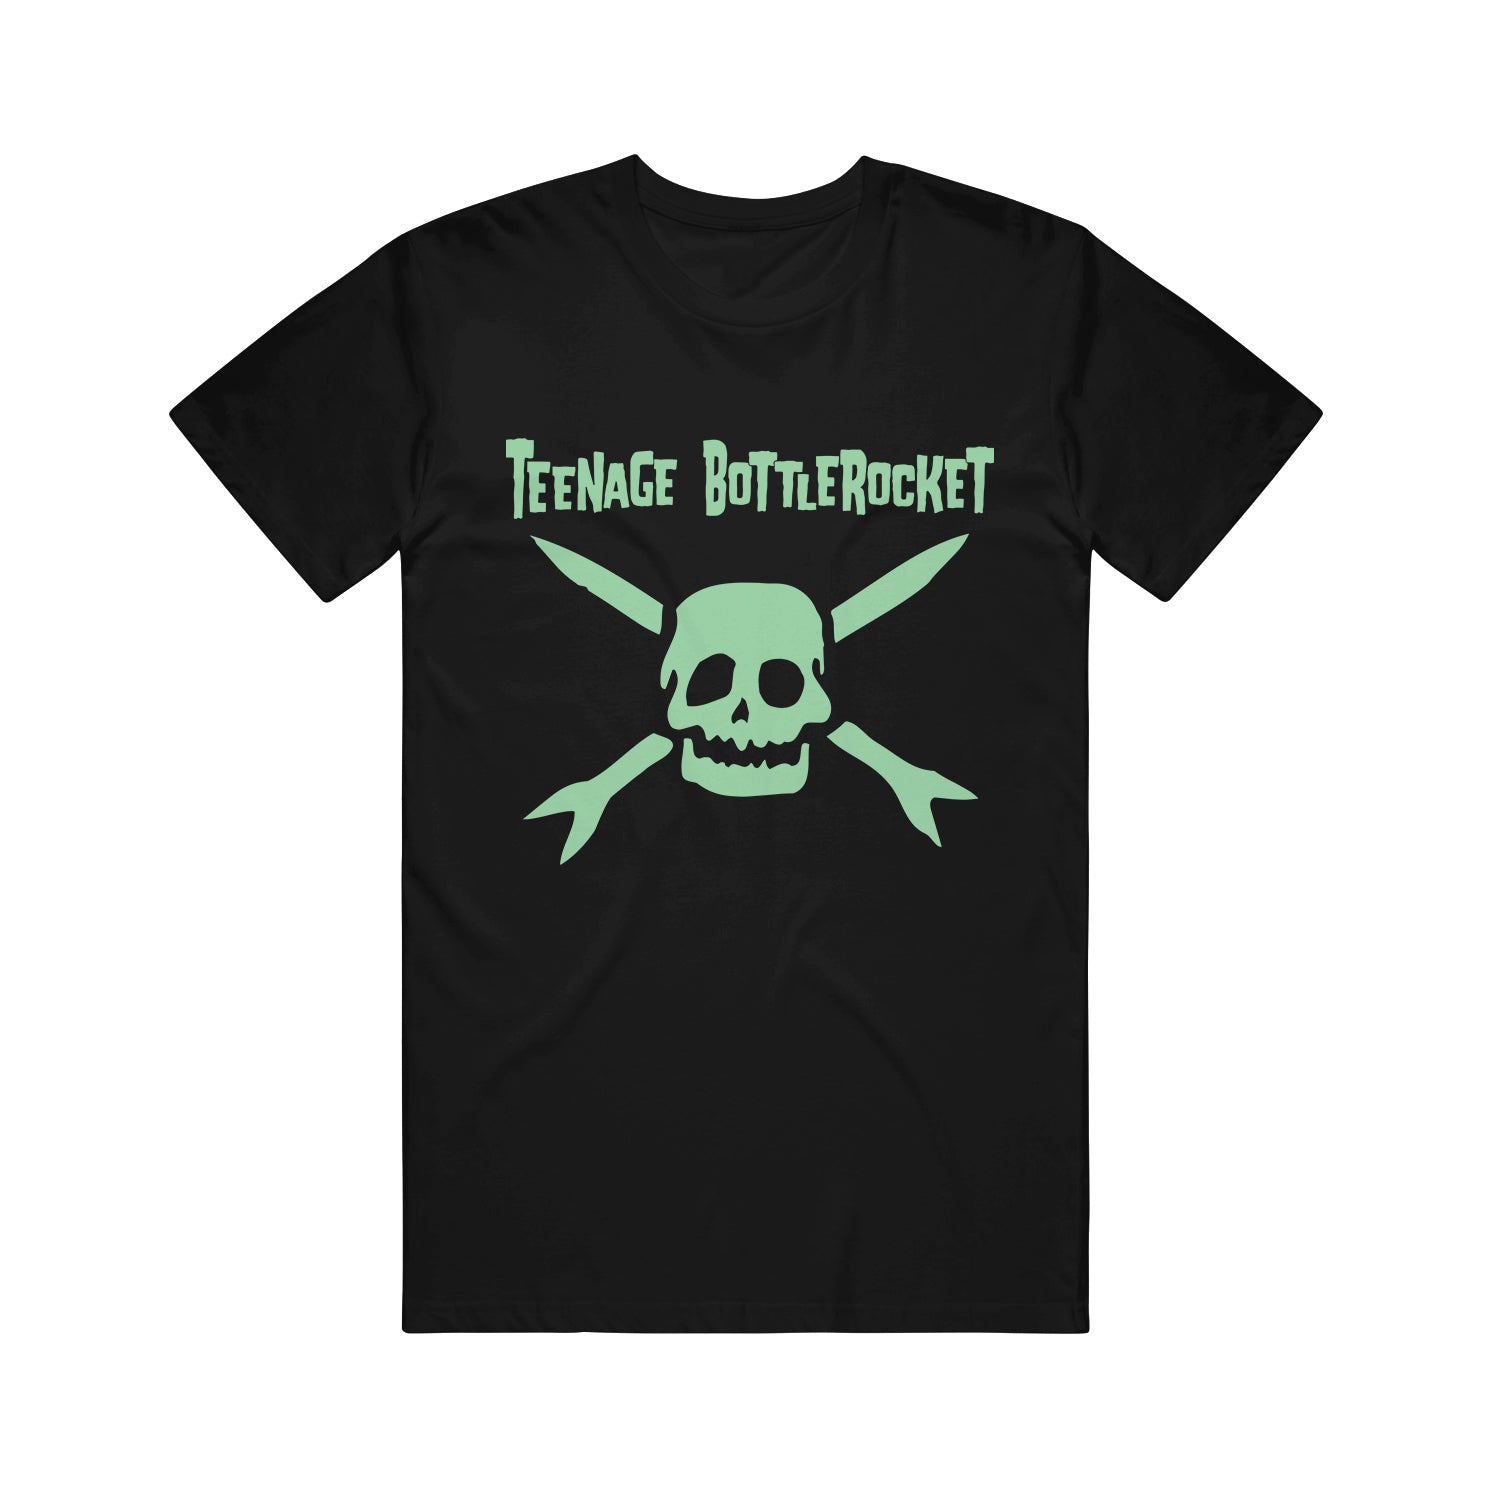 Image of a black tshirt against a white background. The center of the tshirt says teenage bottlerocket in mint text across the chest. Below that is a mint graphic of the teenage bottlerocket logo- a skull head with cross arrows.